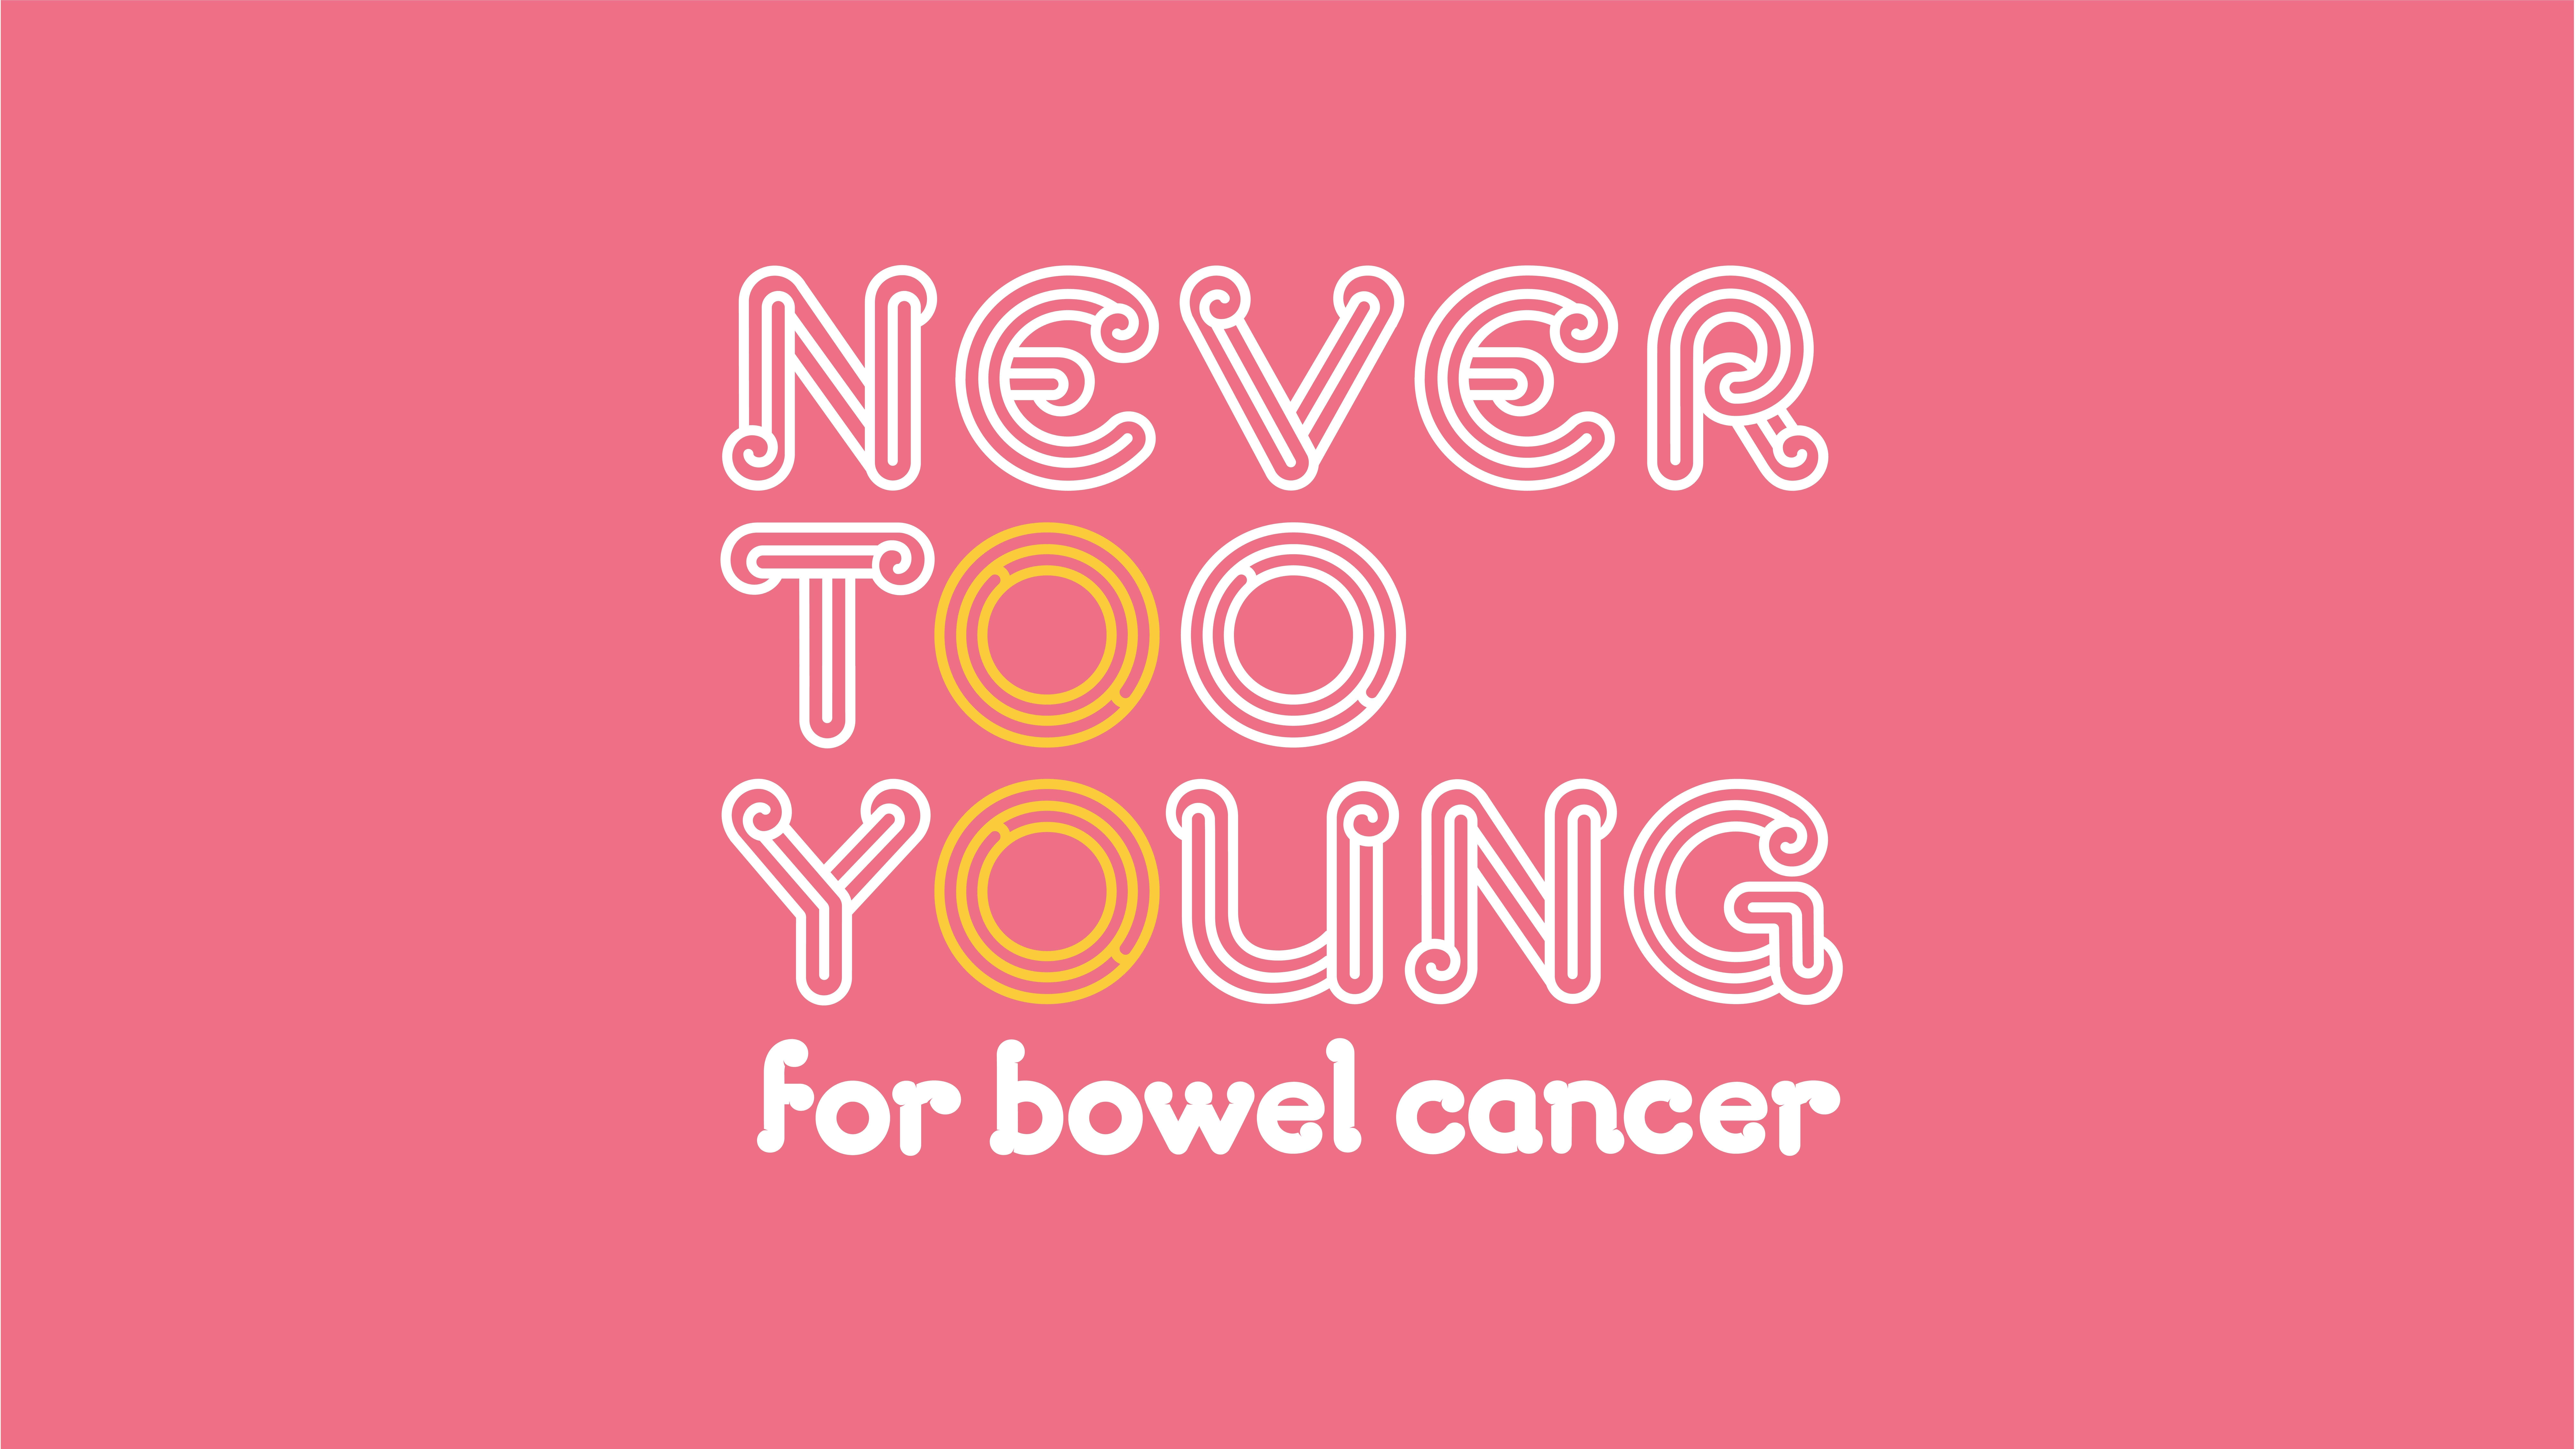 Never Too Young for Bowel Cancer by Taxi Studio